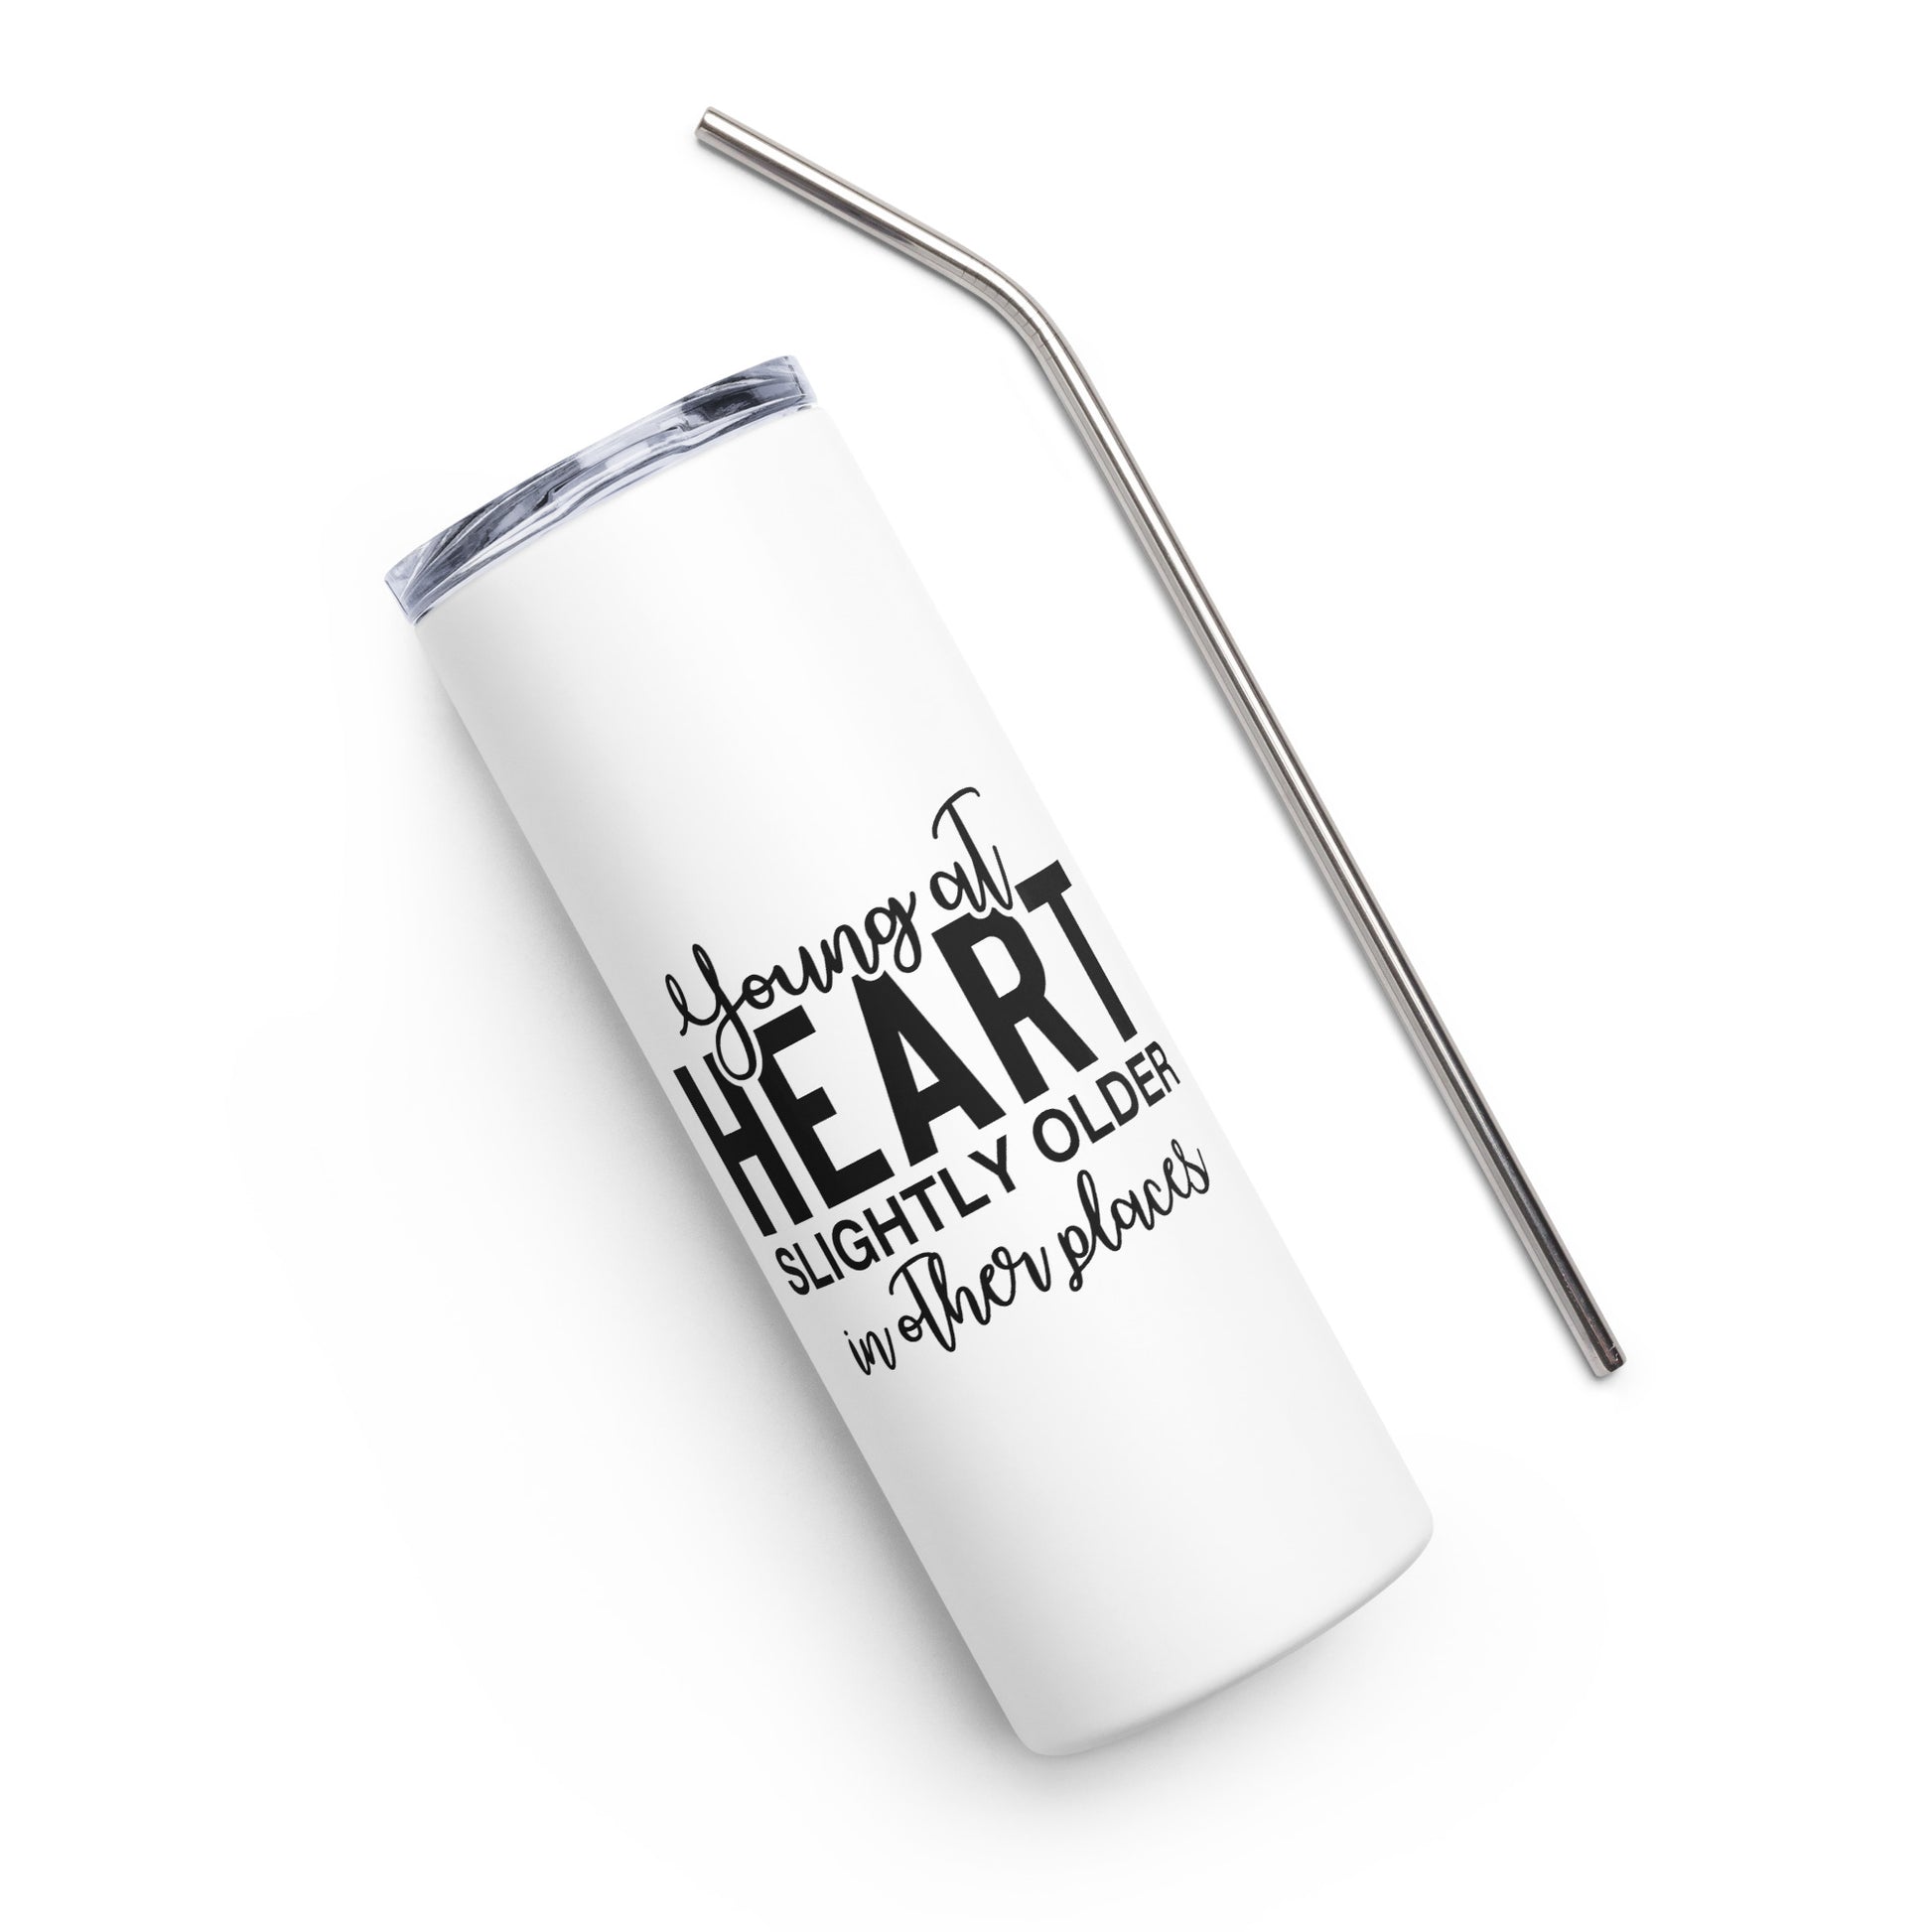 Young at Heart Slightly Older in Other Places Stainless steel tumbler